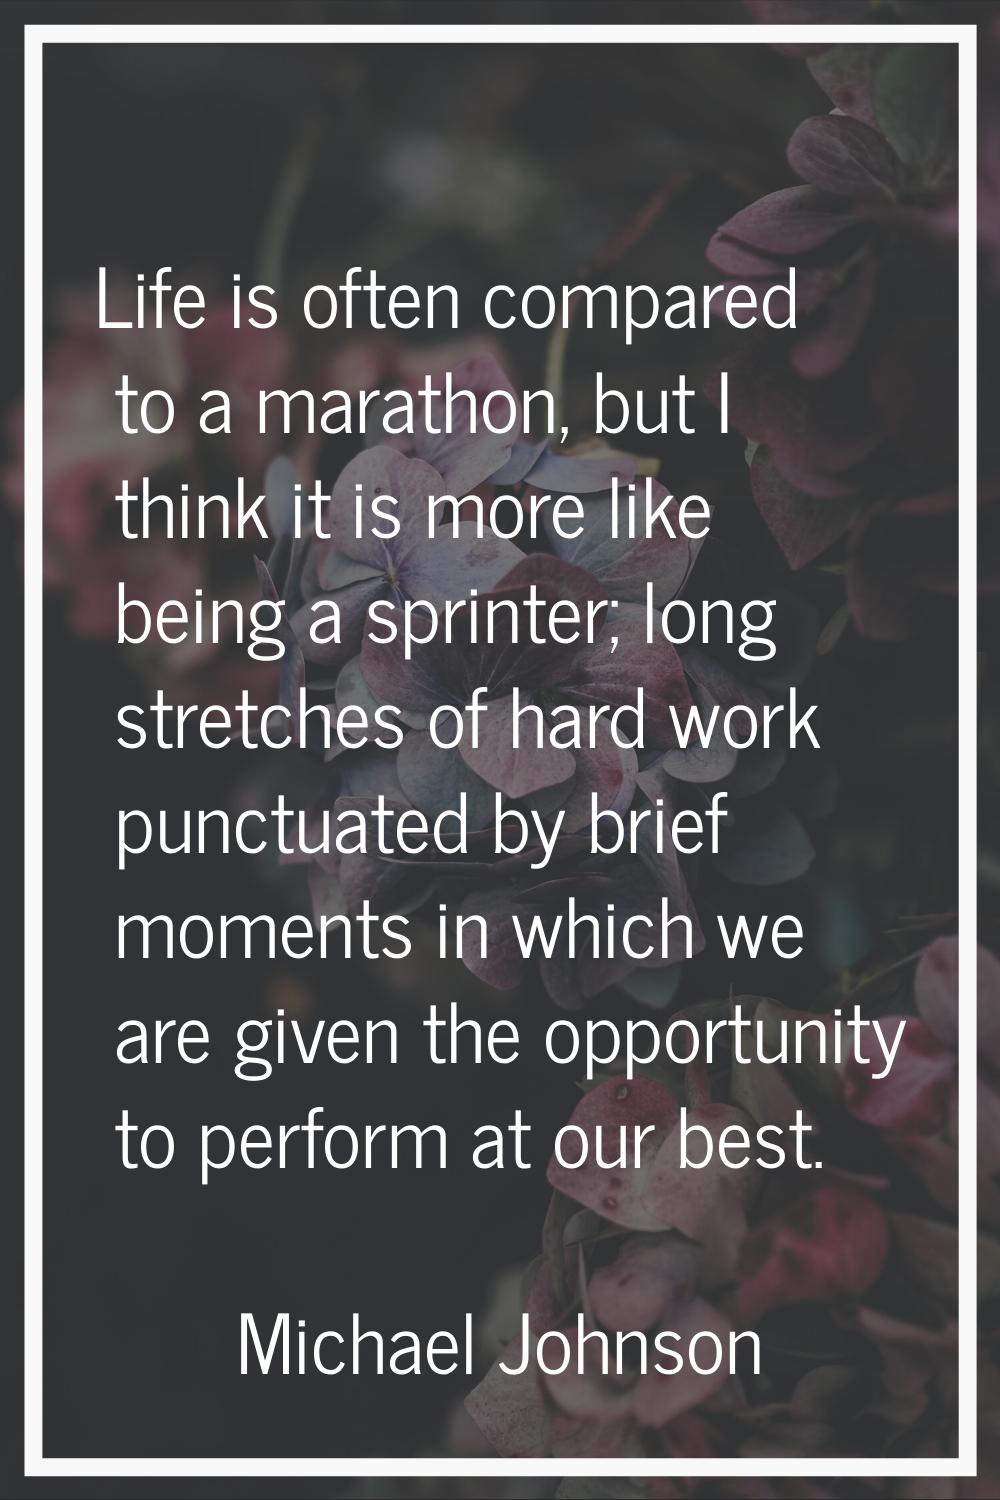 Life is often compared to a marathon, but I think it is more like being a sprinter; long stretches 